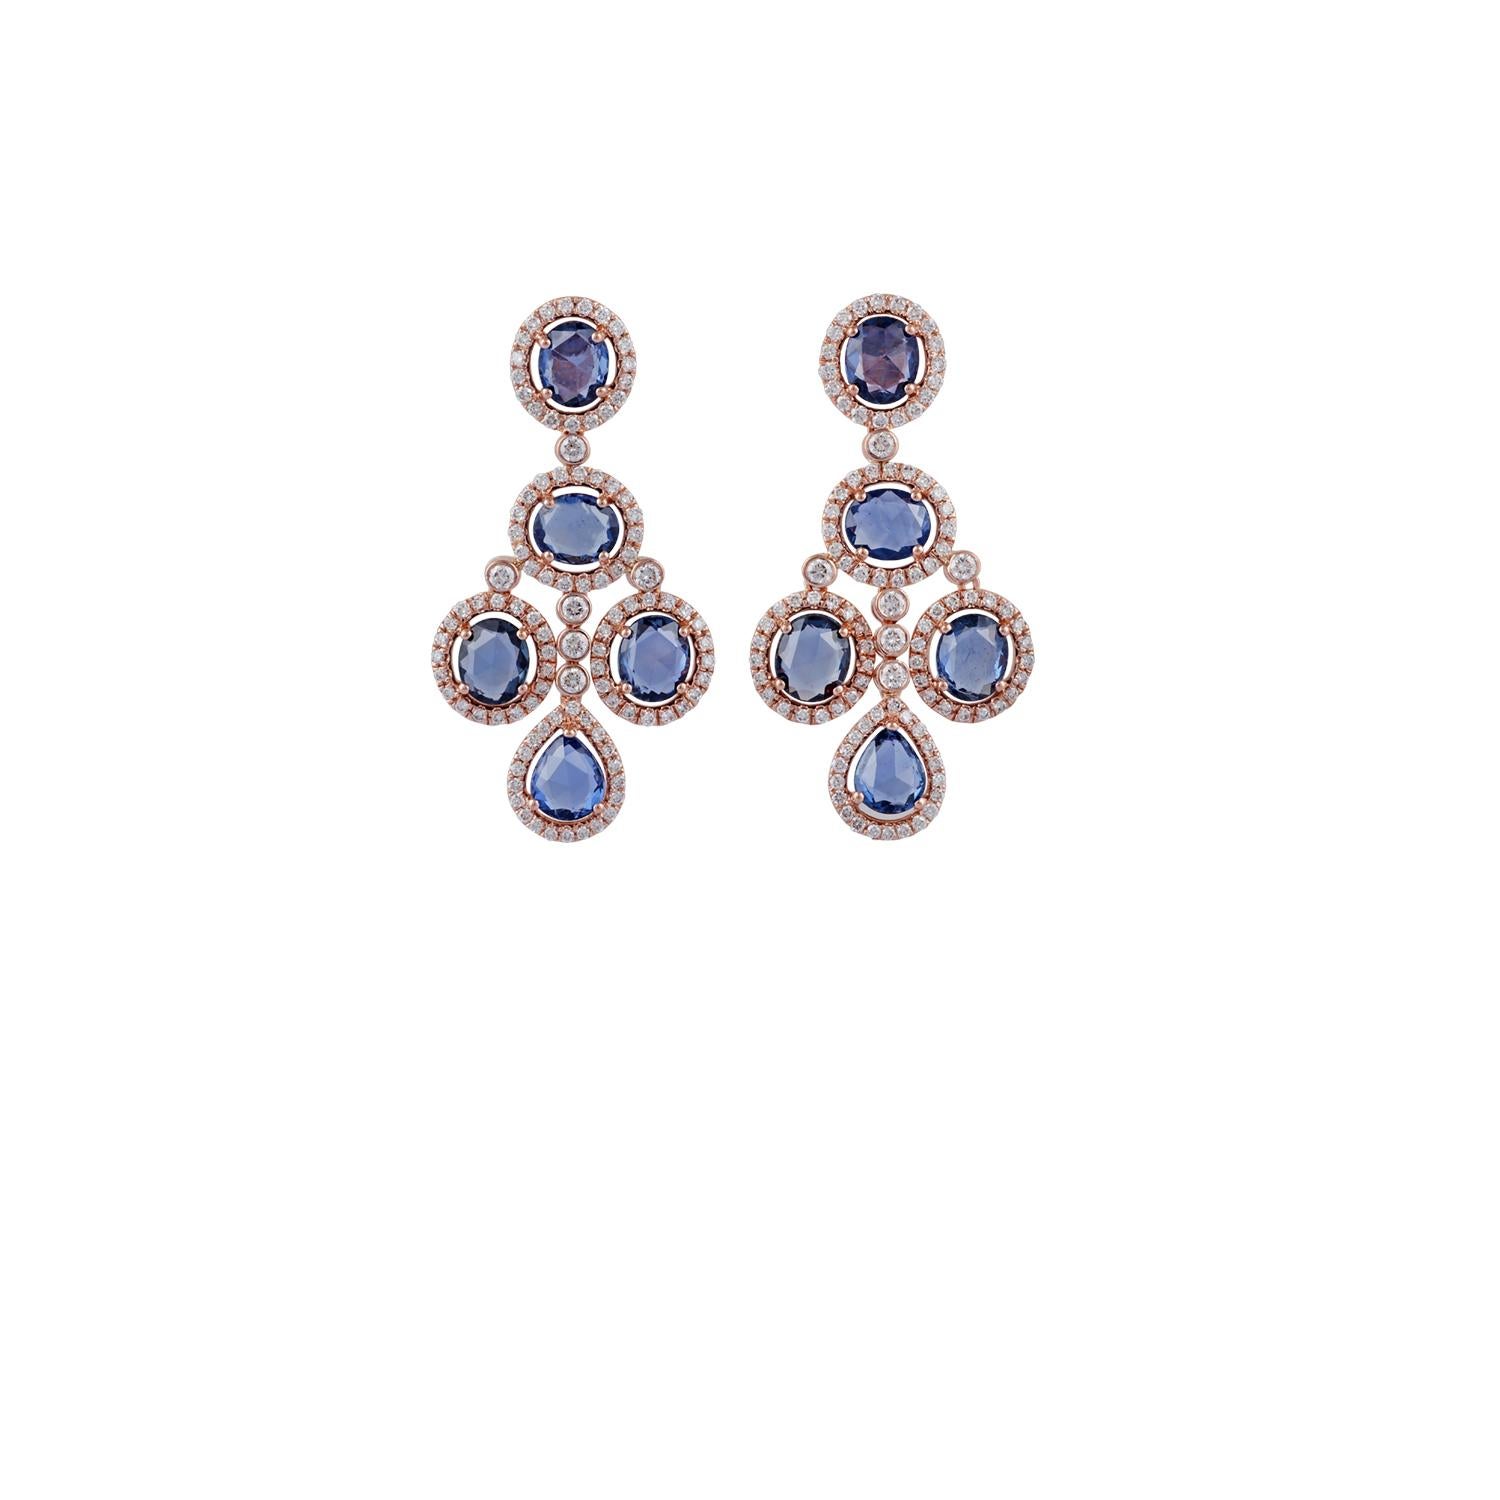 These are an exclusive earrings with sapphire & diamonds features 10 pieces of rose cut sapphires weight 7.50 carats, surrounded with 212 pieces of round brilliant cut diamonds weight 1.35 carats, these entire earrings are studded in 18k rose gold